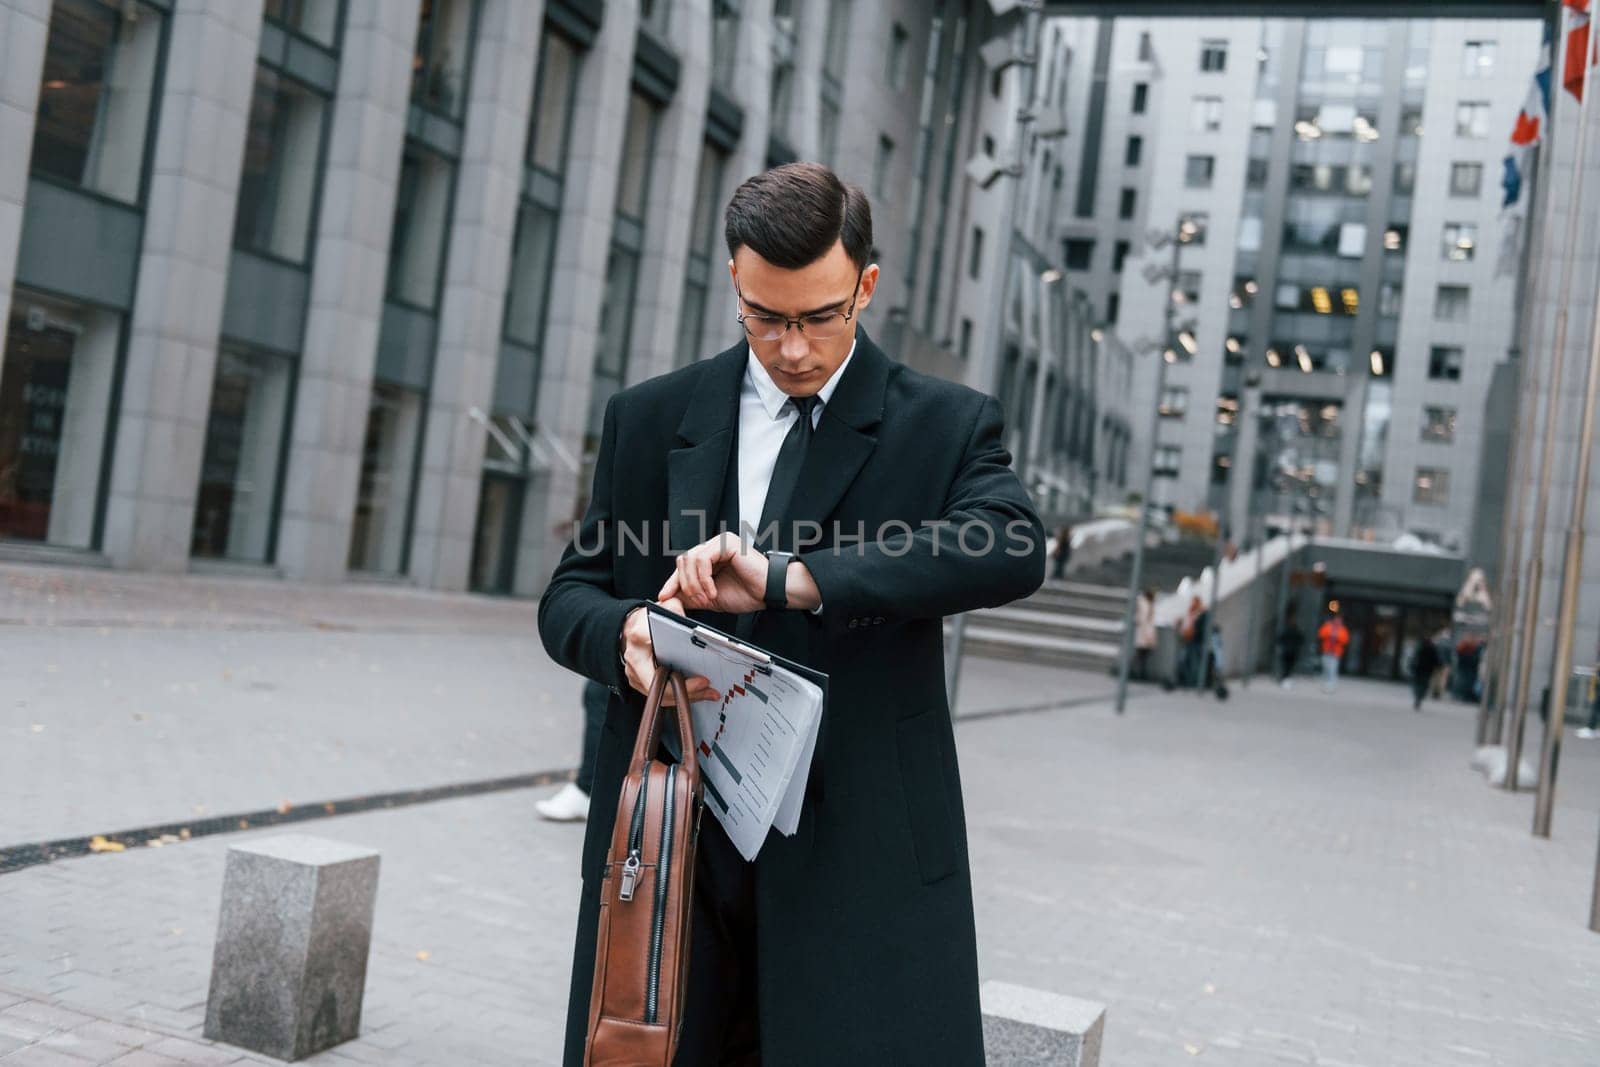 Busy for a work. Businessman in black suit and tie is outdoors in the city by Standret